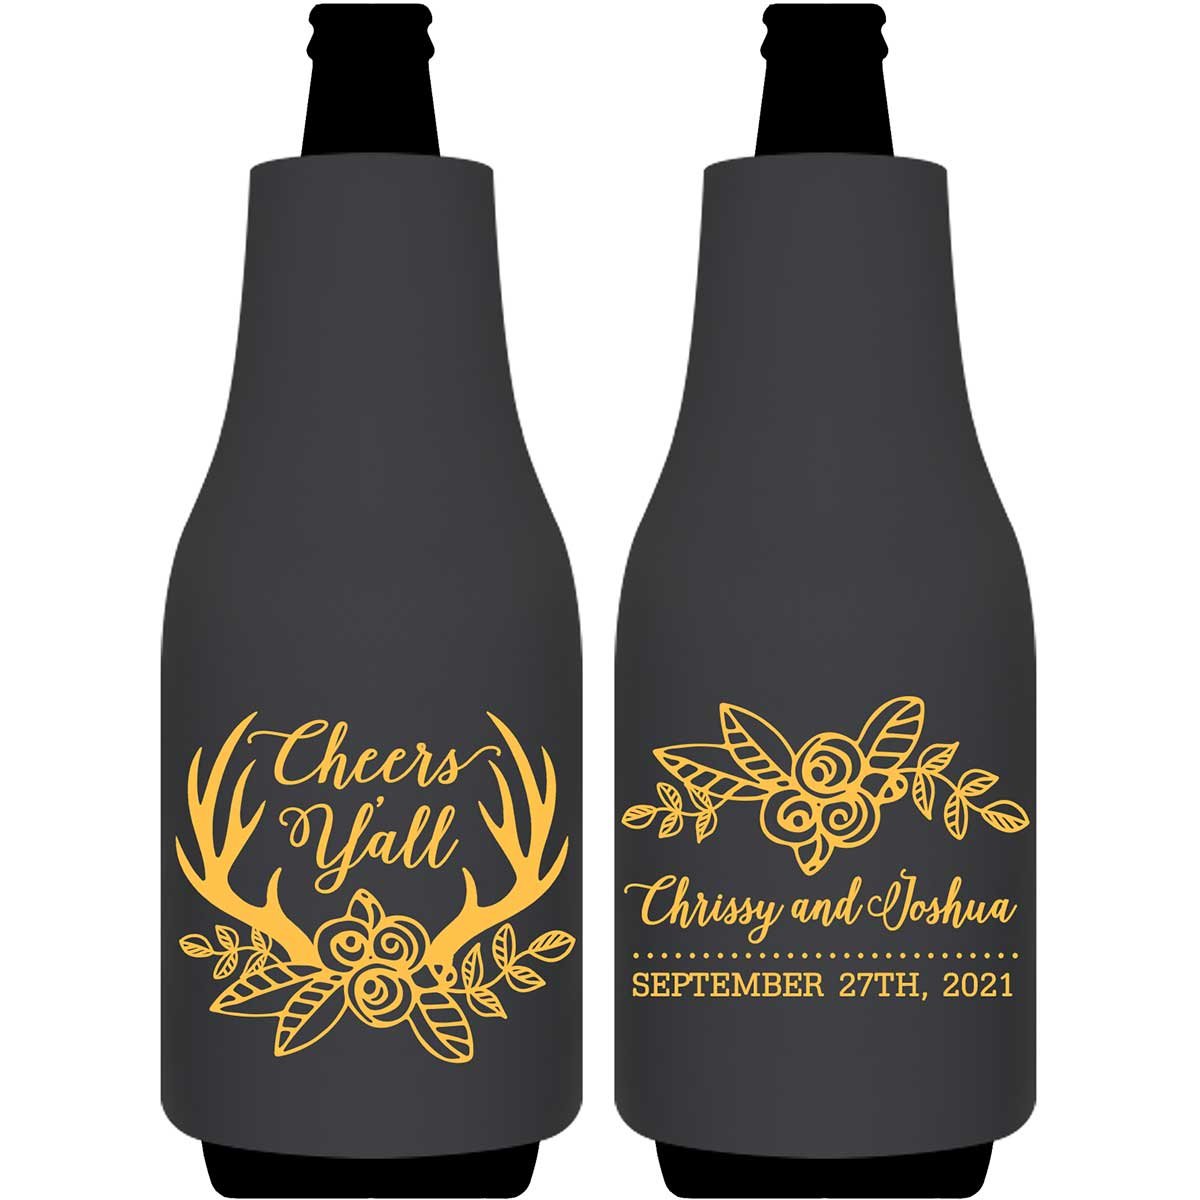 Cheers Y'All 1A Country Wedding Foldable Bottle Sleeve Koozies Wedding Gifts for Guests